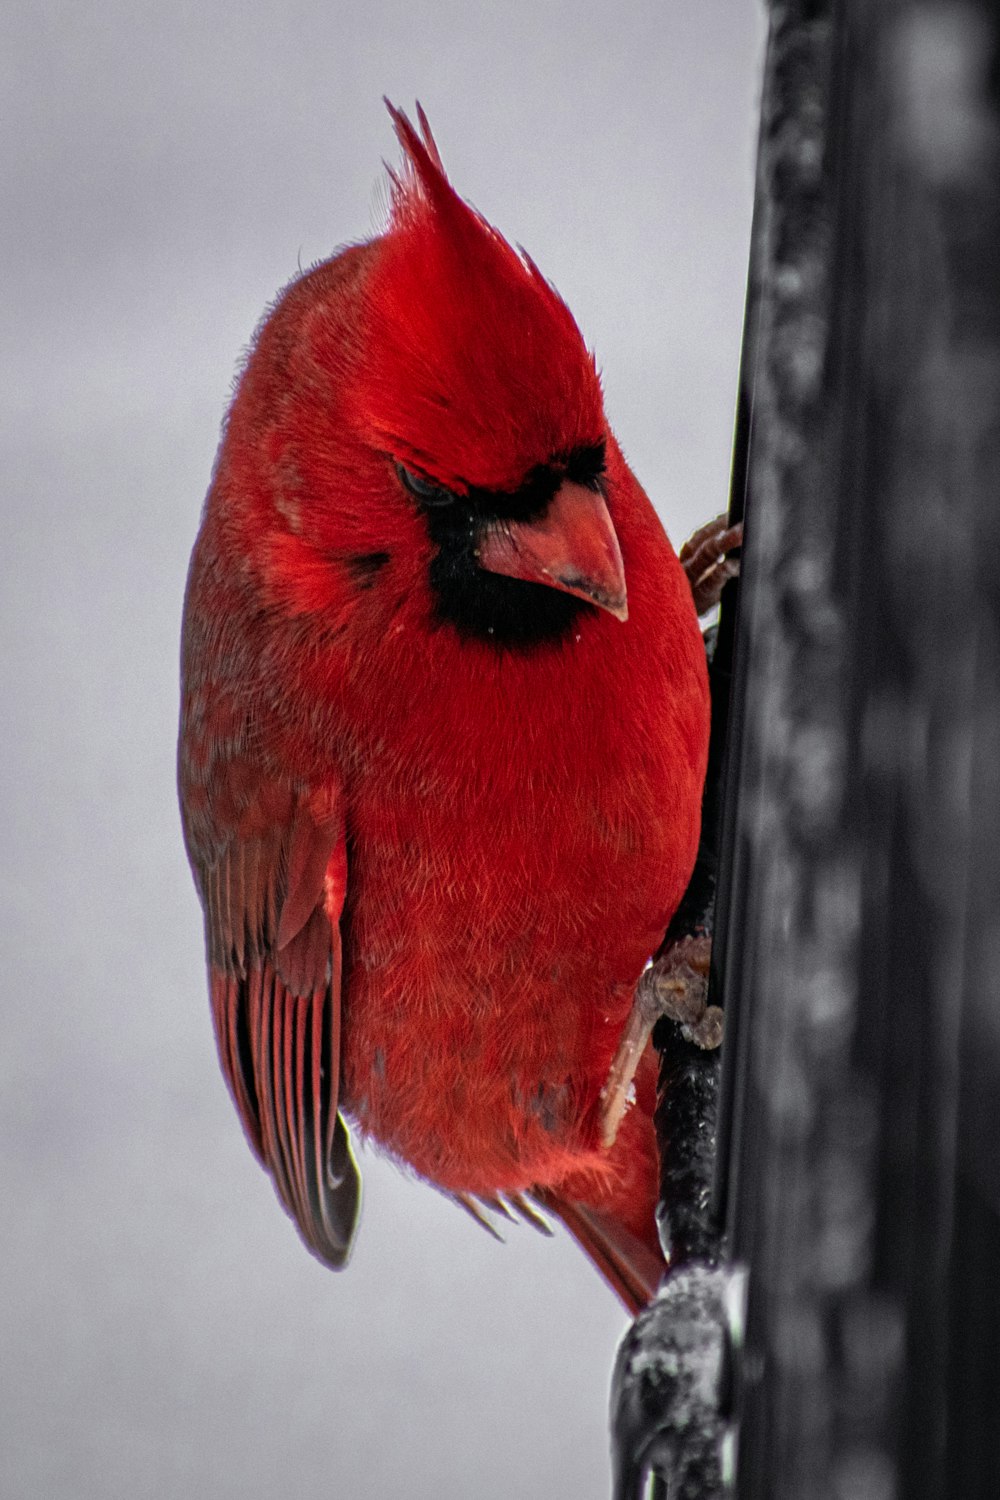 a red bird perched on top of a metal pole